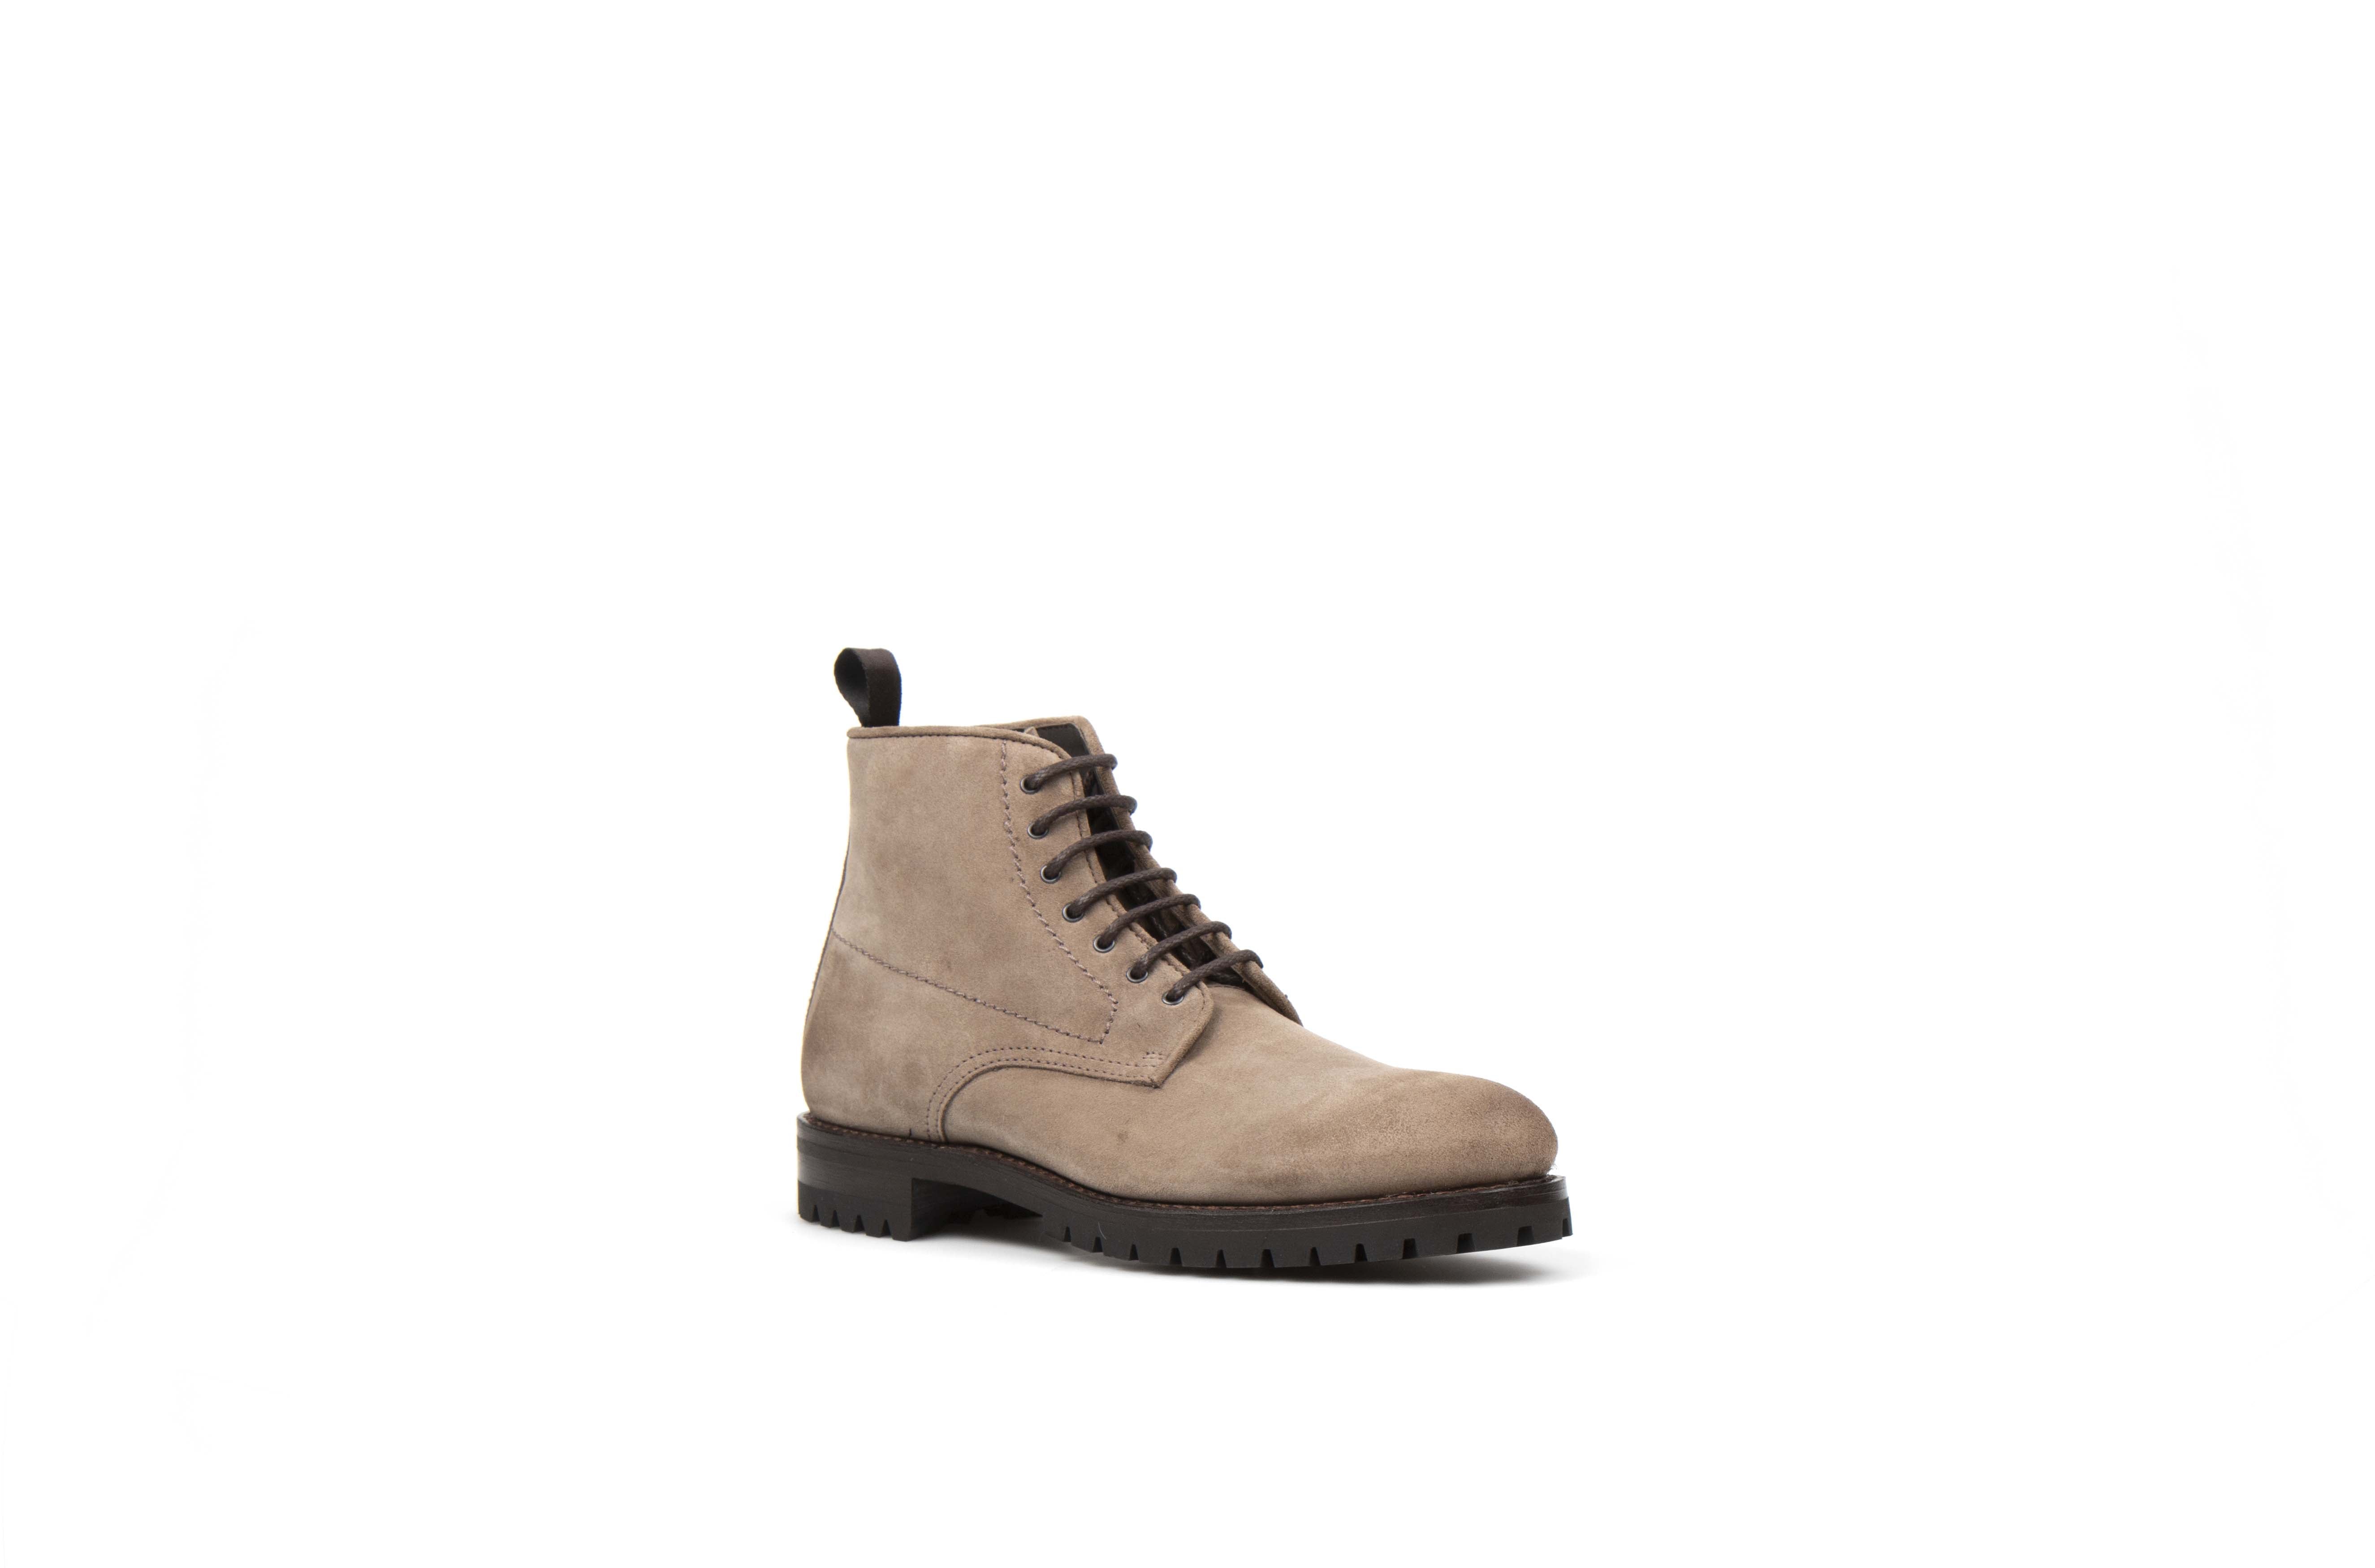 Legend Sand Suede Classic Boots